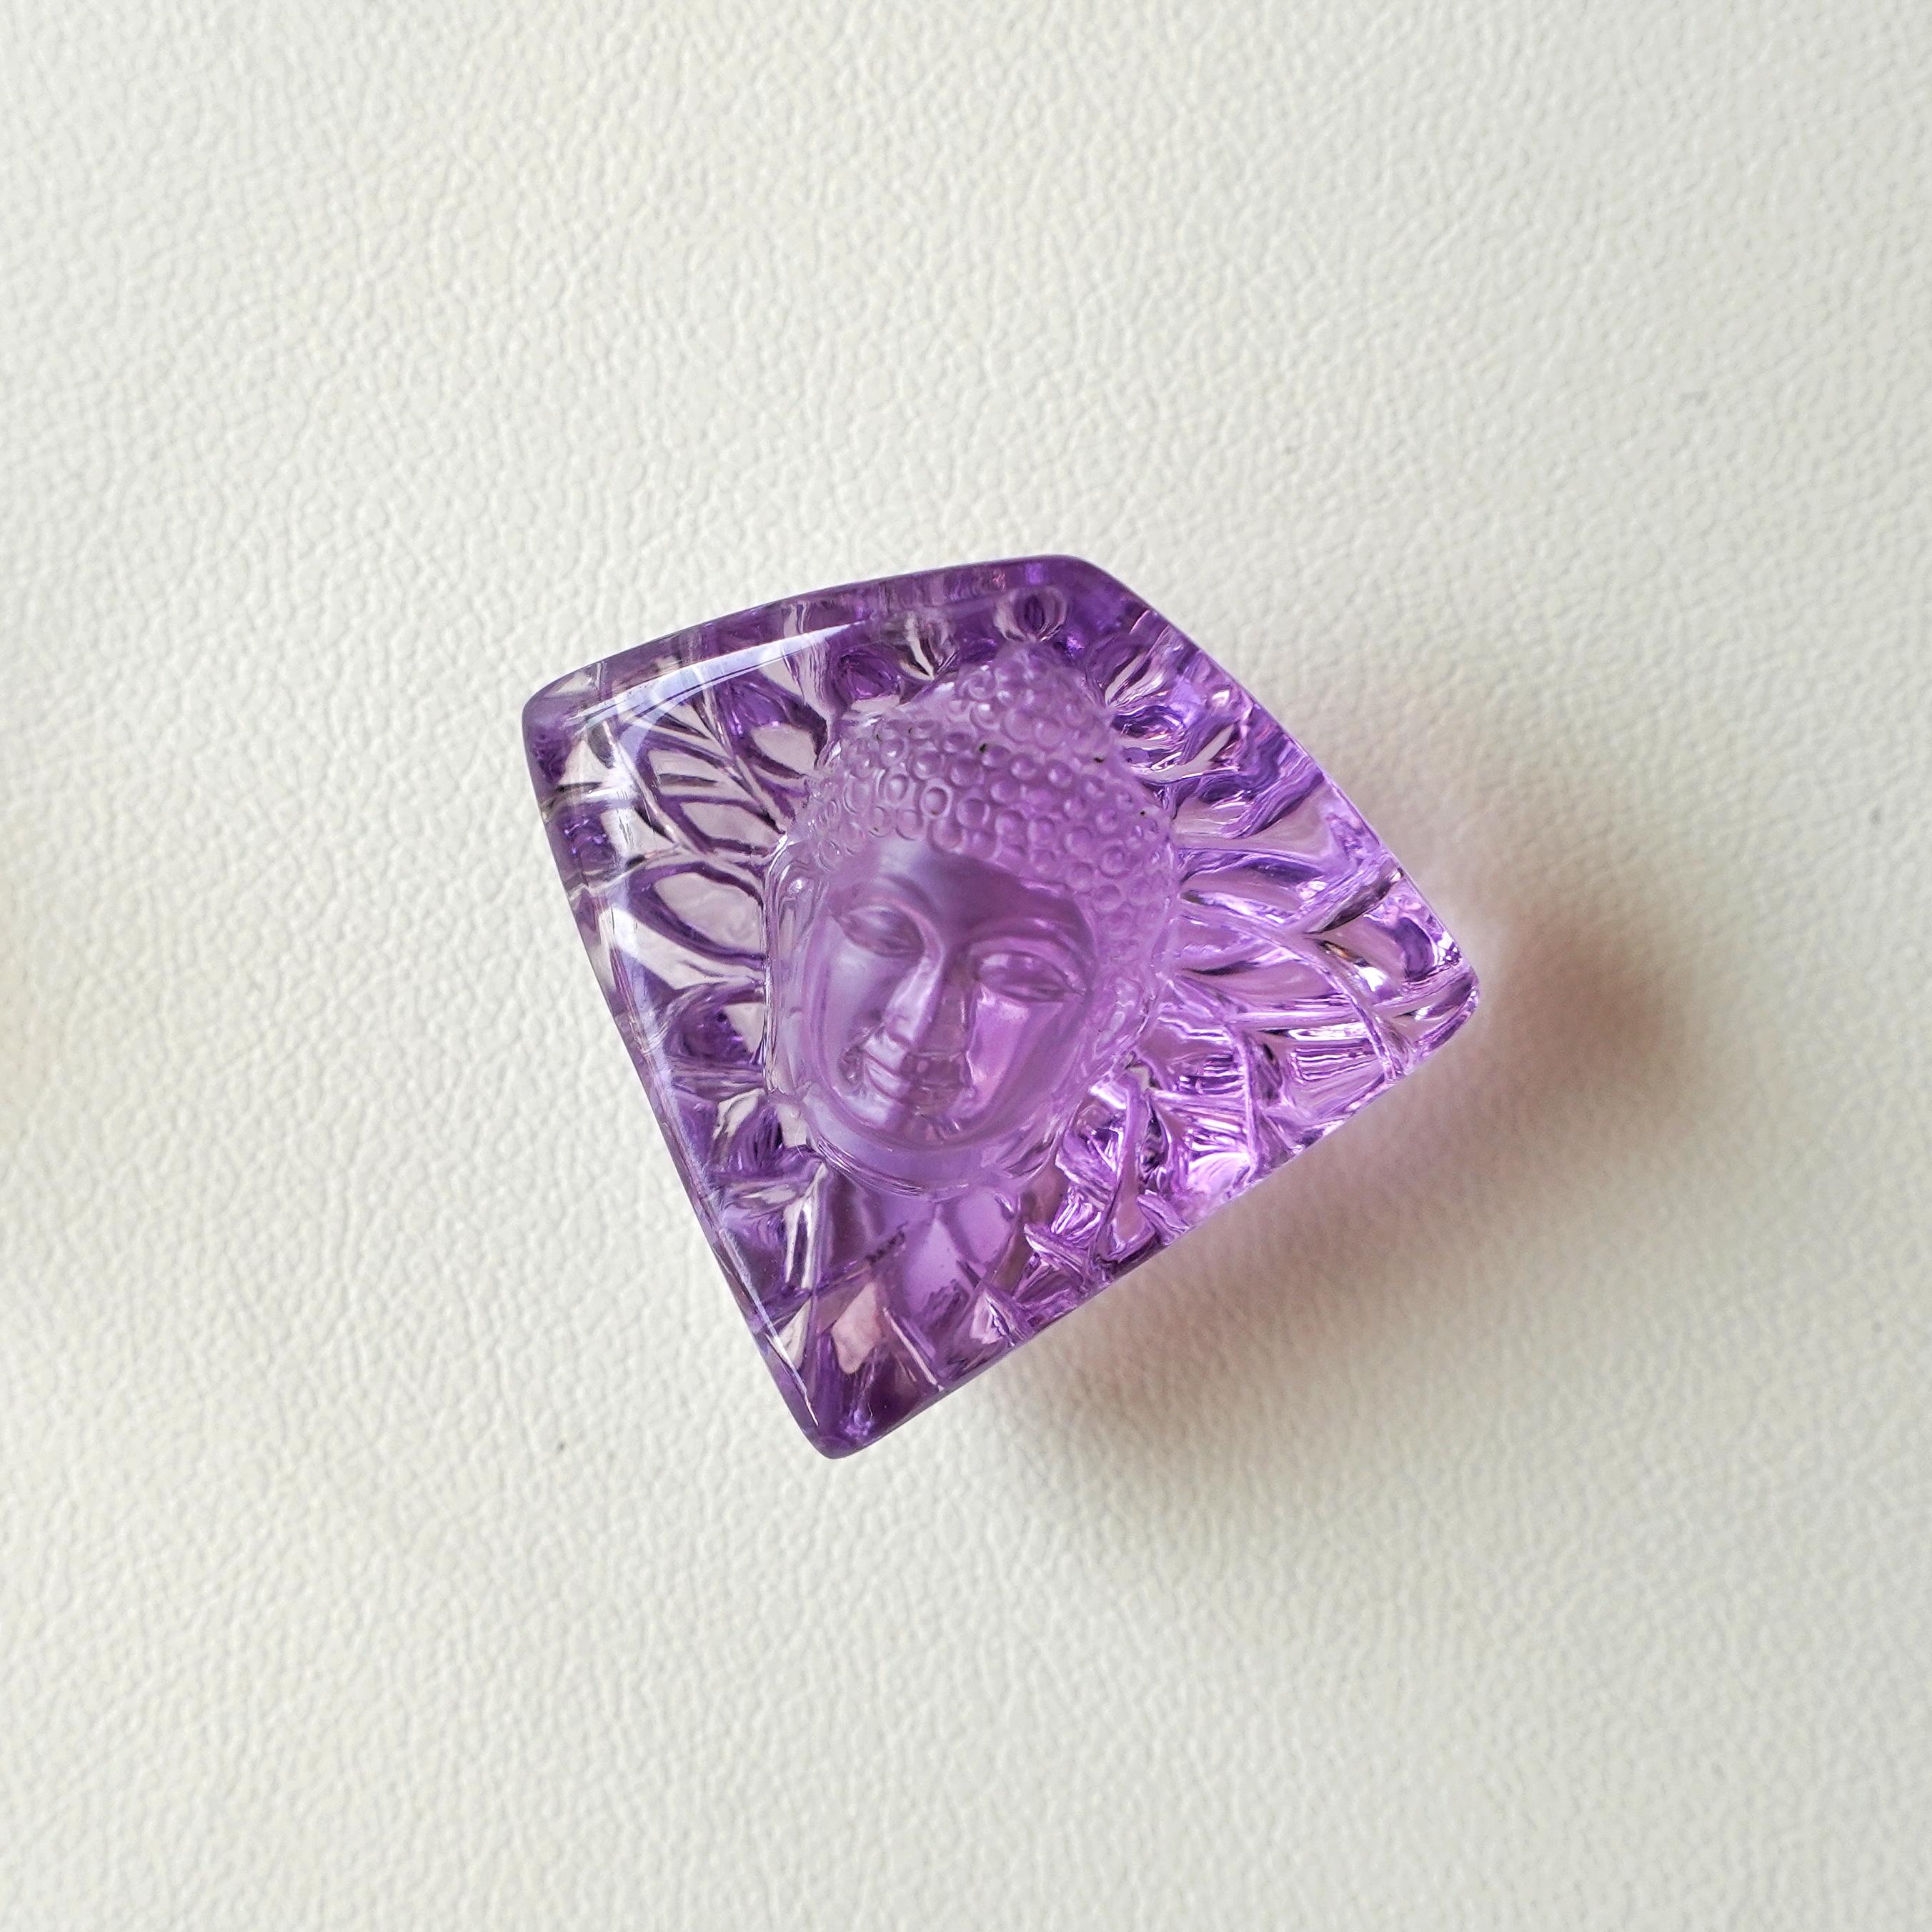 This buddha face carving on natural brazilian lavender amethyst is hand-carved with extreme detail by our expert lapidary artist in Jaipur which transform raw stones into unique art works. 
The gemstone is of very good quality with Lavender color